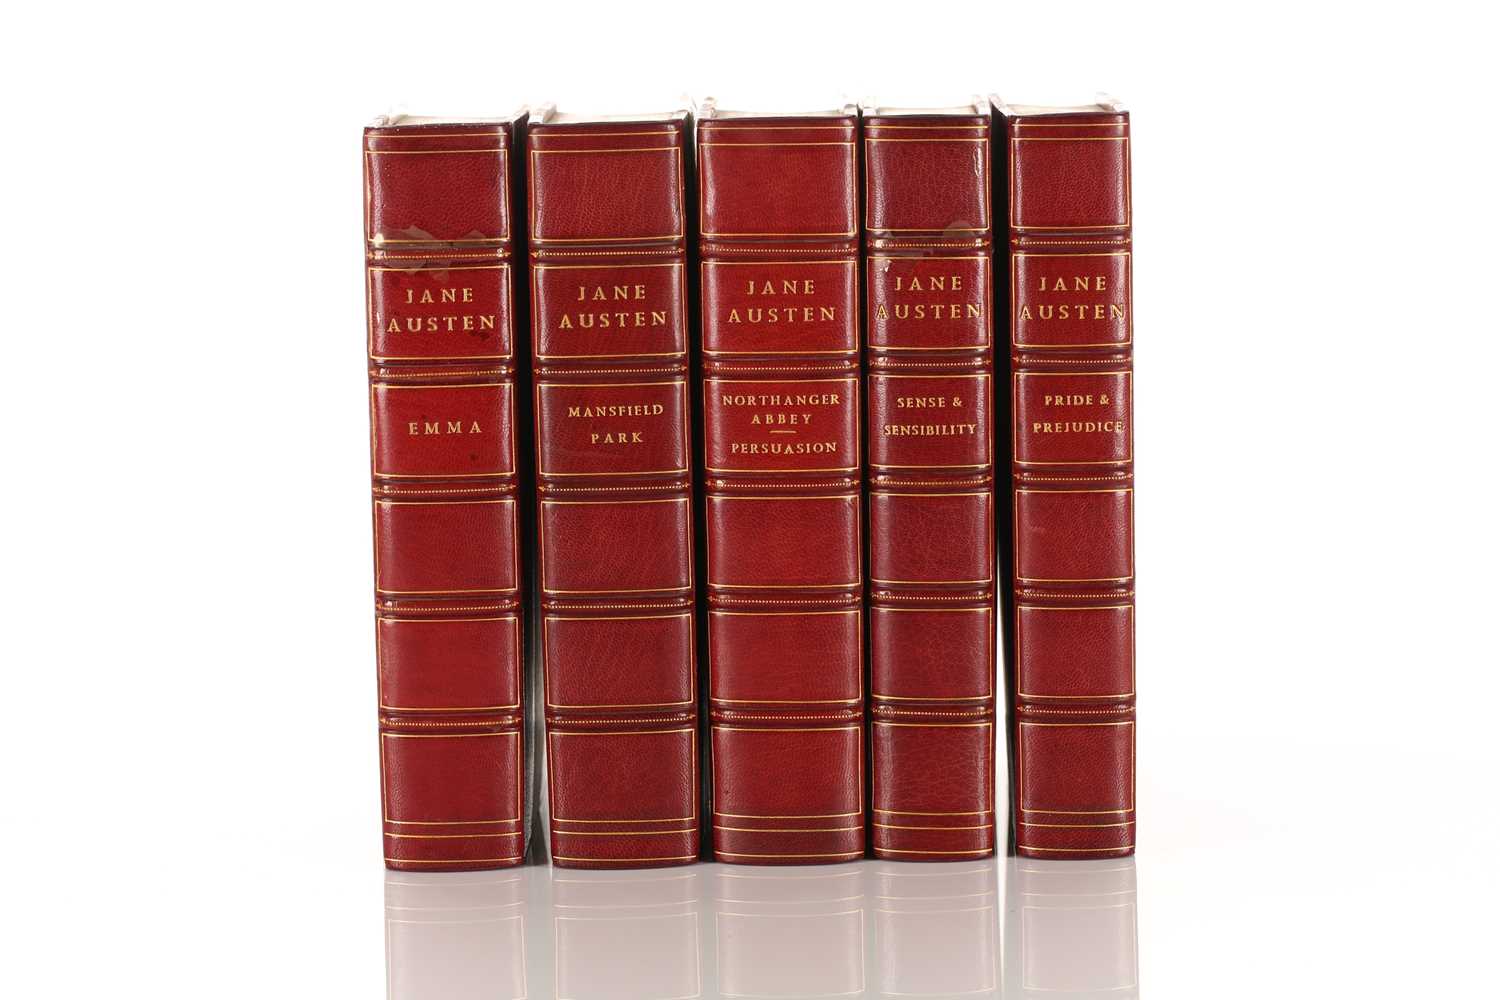 Austen, Jane; 'The Novels of..' in five volumes, The Text Based on Collation of the Early Editions